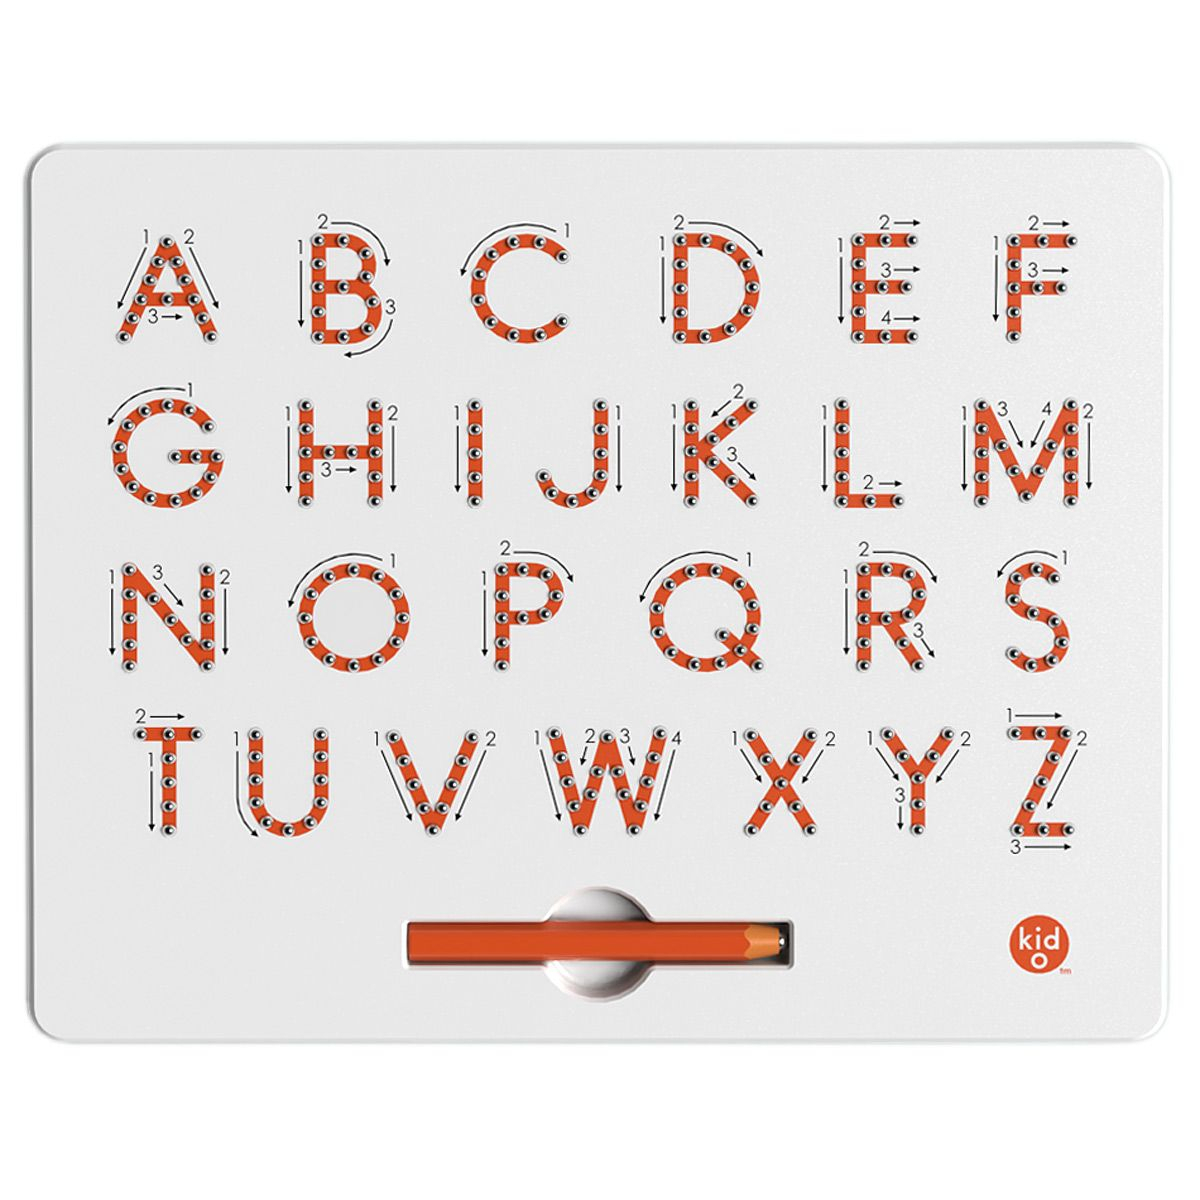 A-To-Z Magnetic Tablet | Educational Toy, For Kids, Alphabet intended for Alphabet Tracing Toys